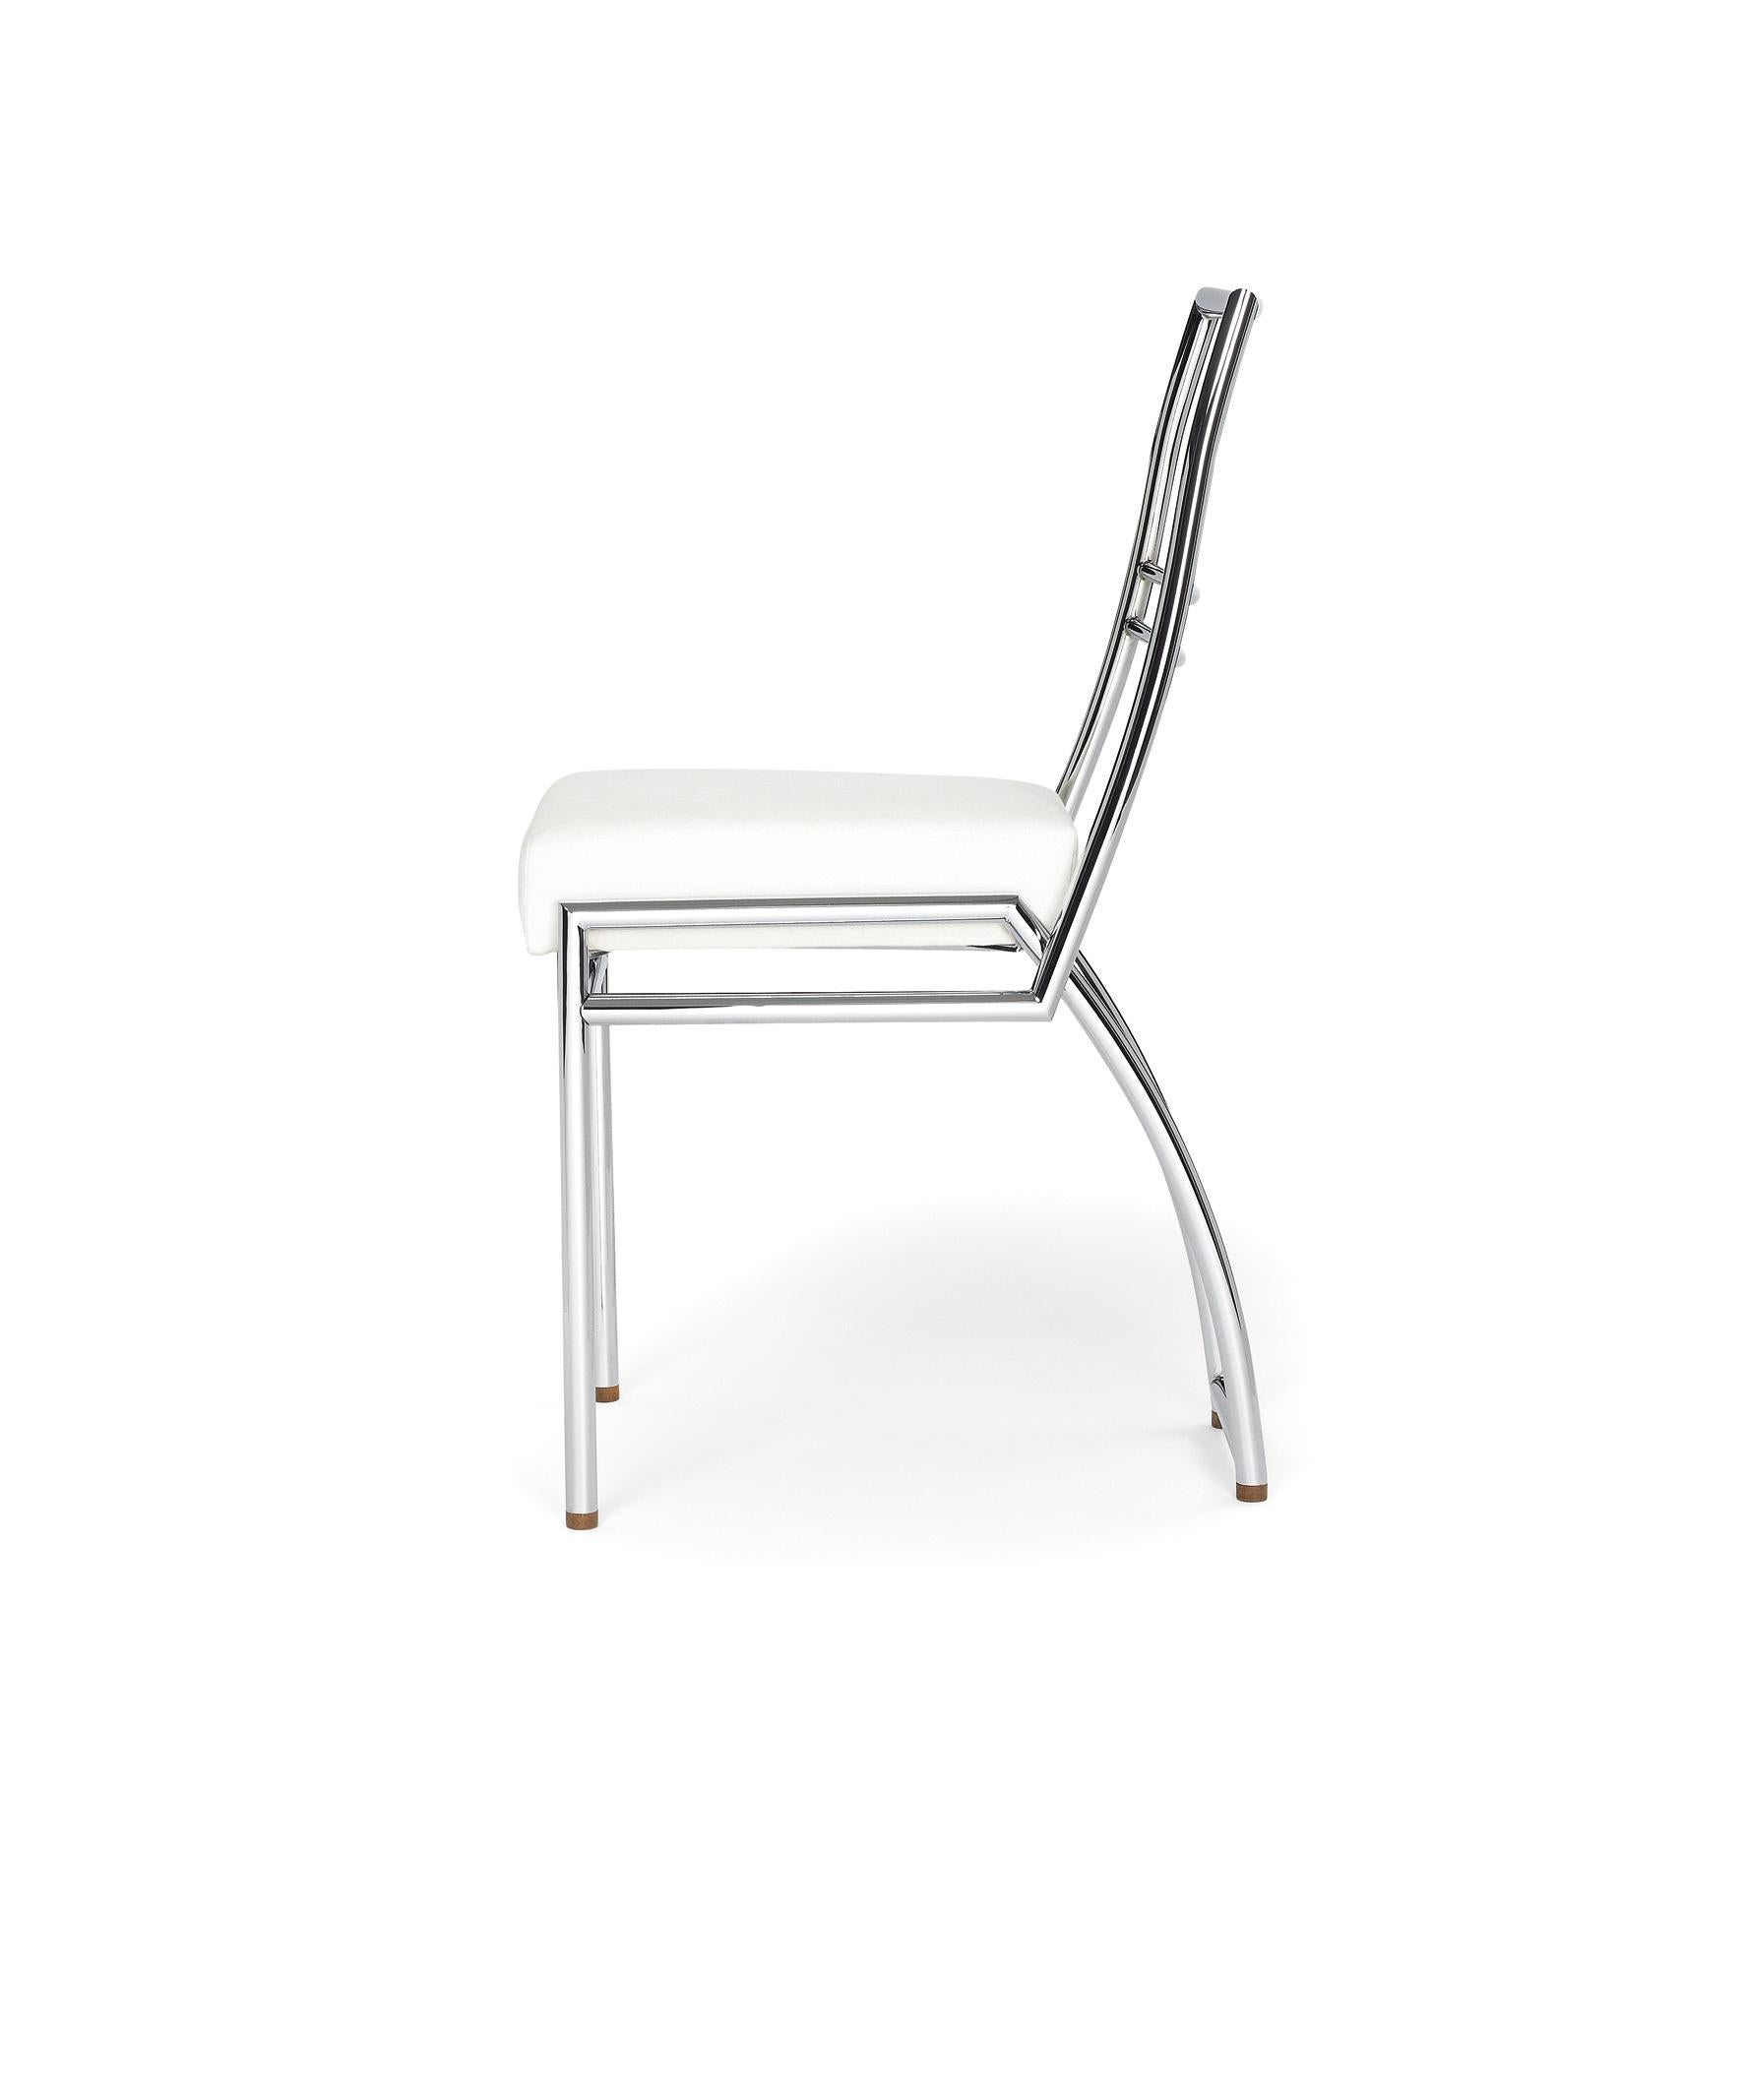 Aixia was one of Eileen Gray‘s personal favourites. She used this chair in all of her apartments, sometimes in the dining room, sometimes at a desk. Even in 1929, when she converted a 40 m² apartment in Paris, Rue Chateaubriand, into an atelier of